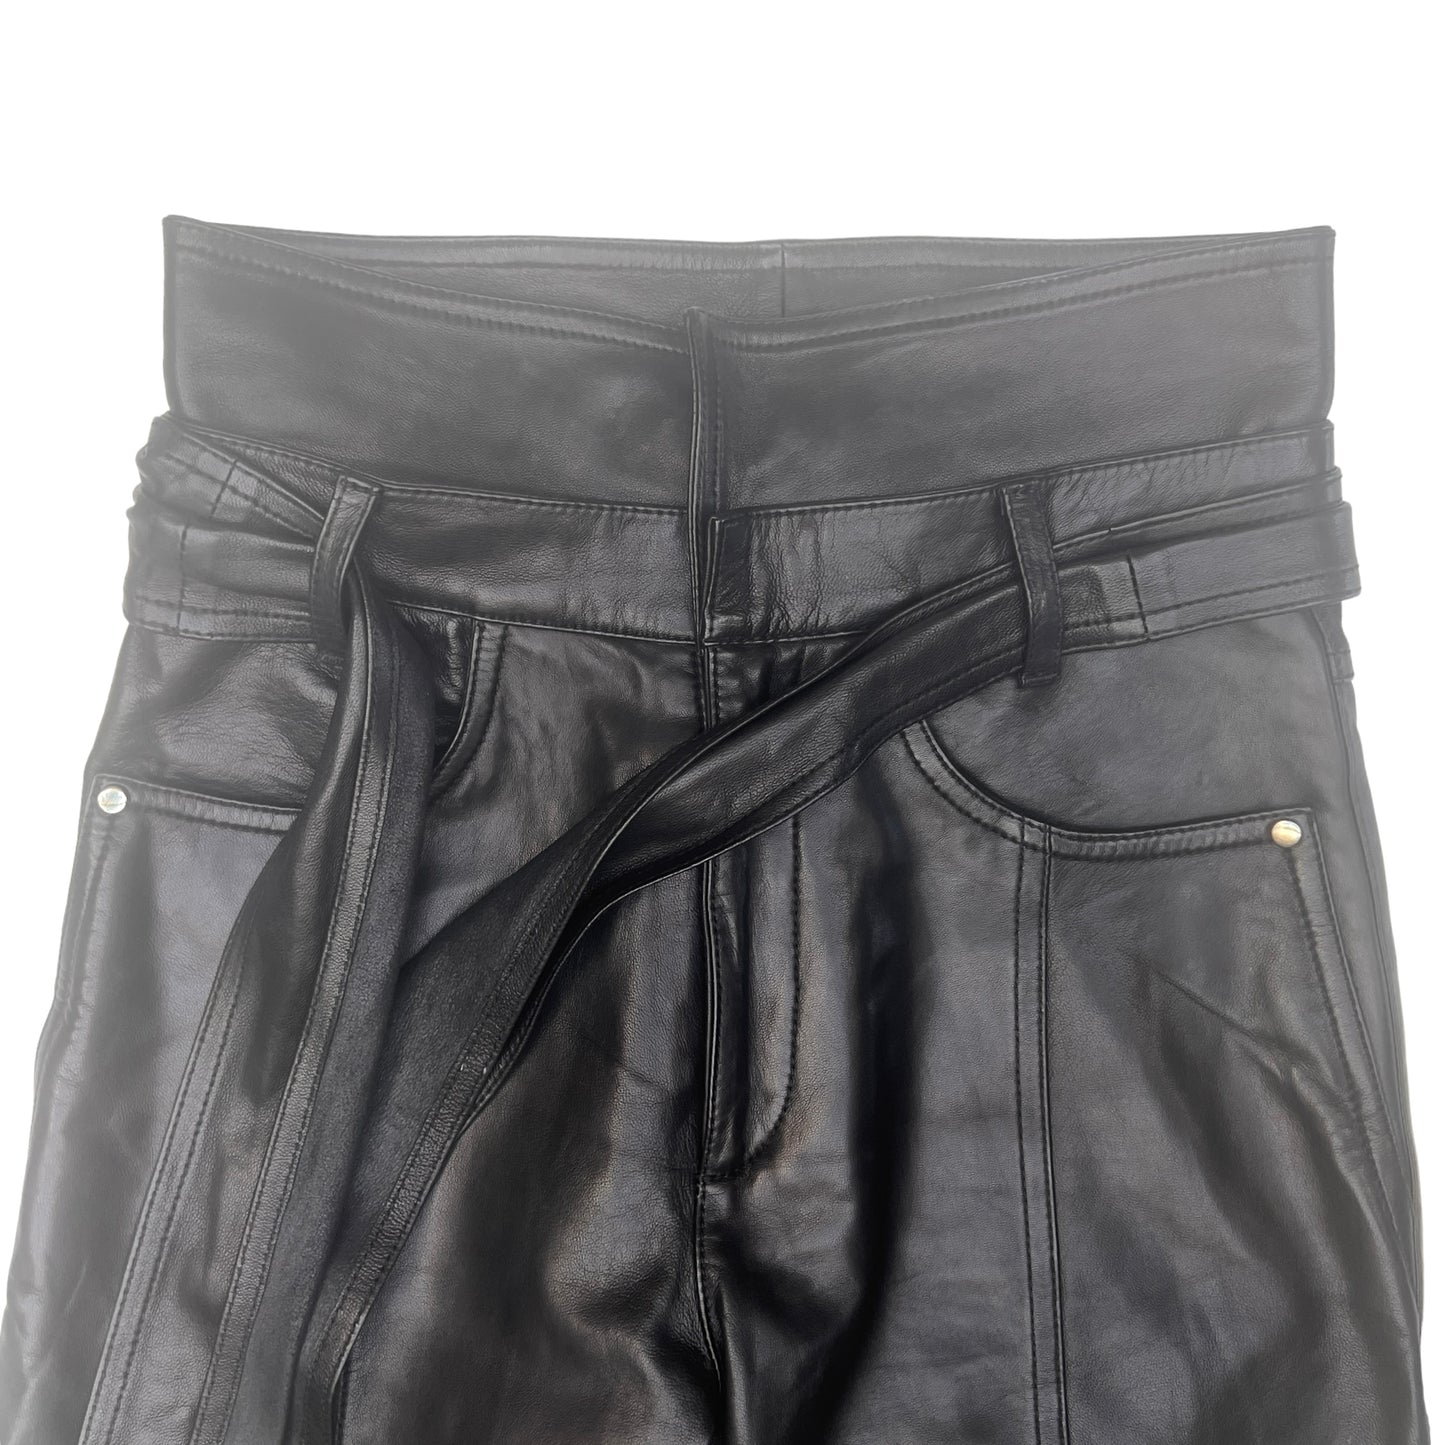 2020 Black High Waisted Leather Pants - XS